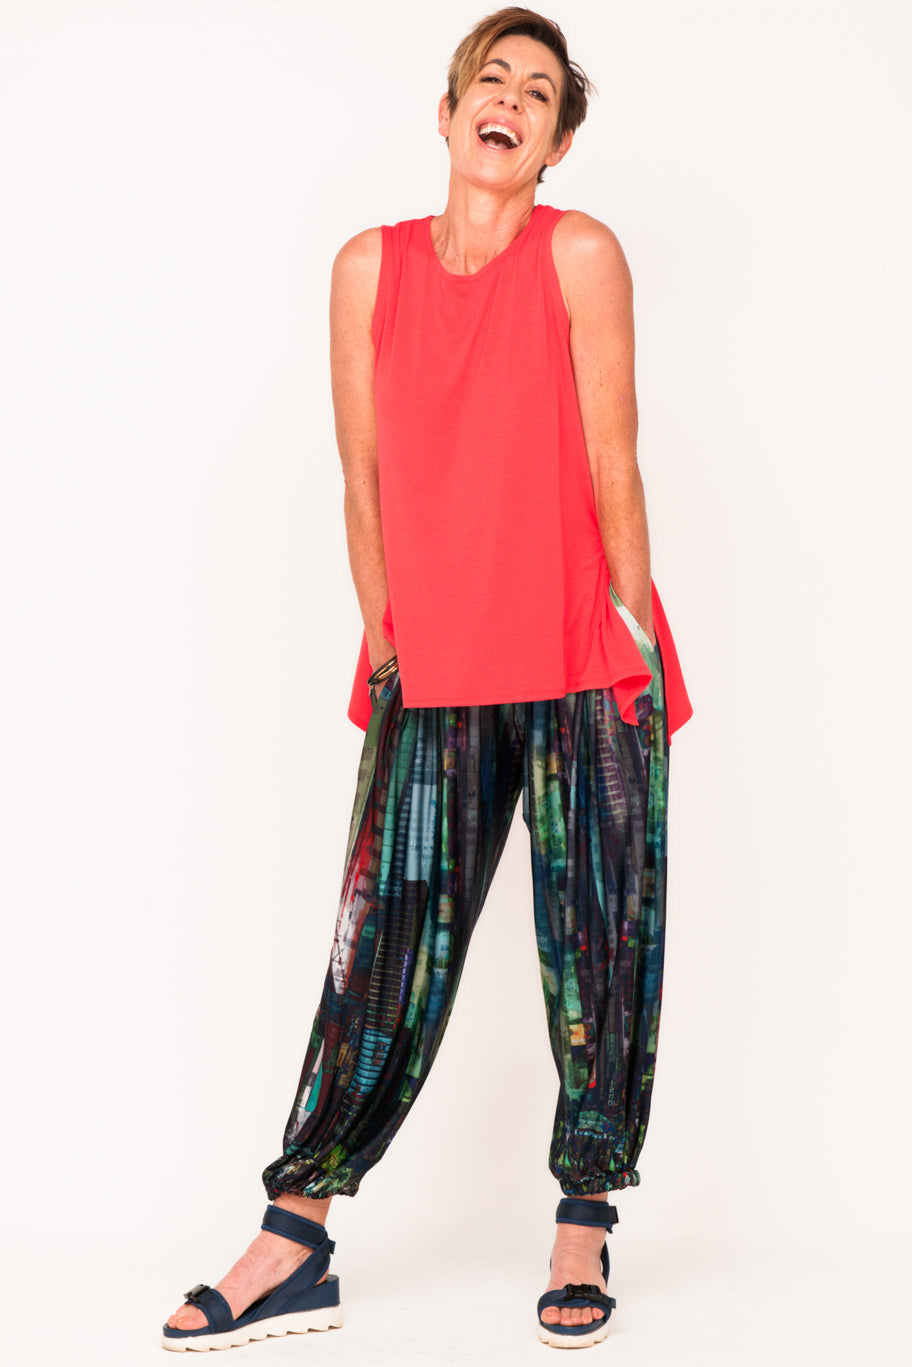 tank-red-track-pant-exercise-clothes-women-over-40